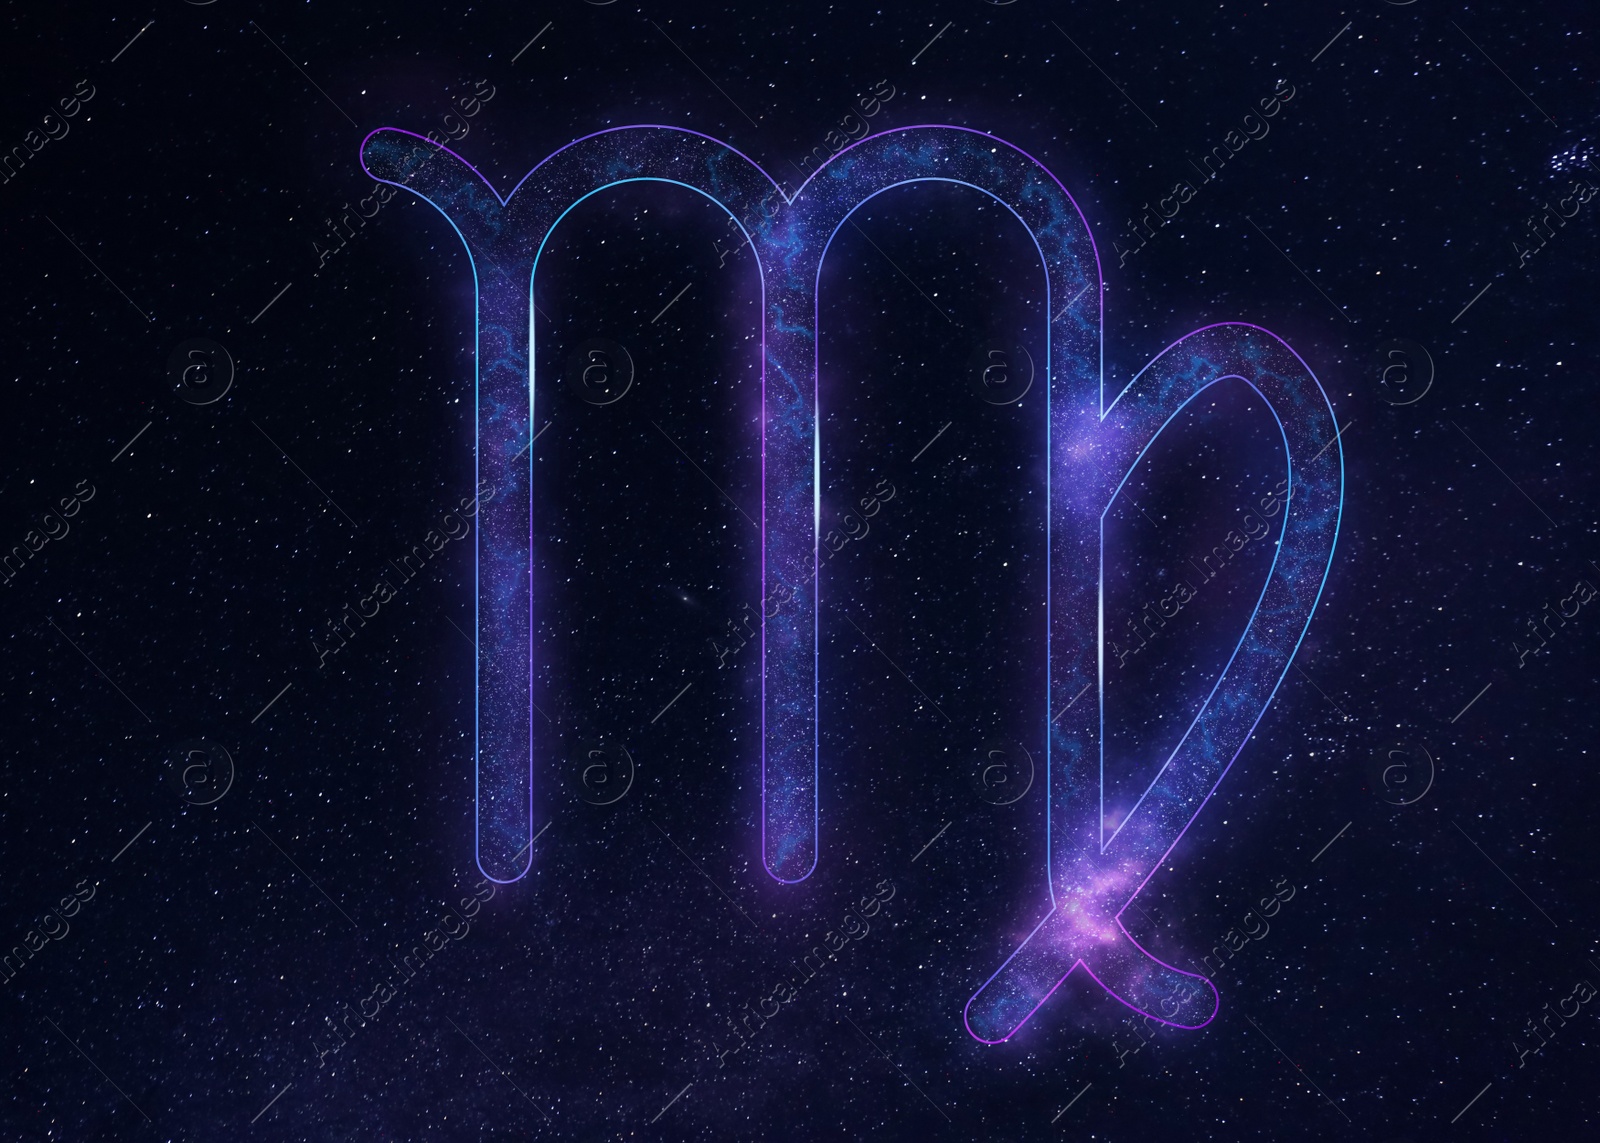 Illustration of Virgo astrological sign in night sky with beautiful sky